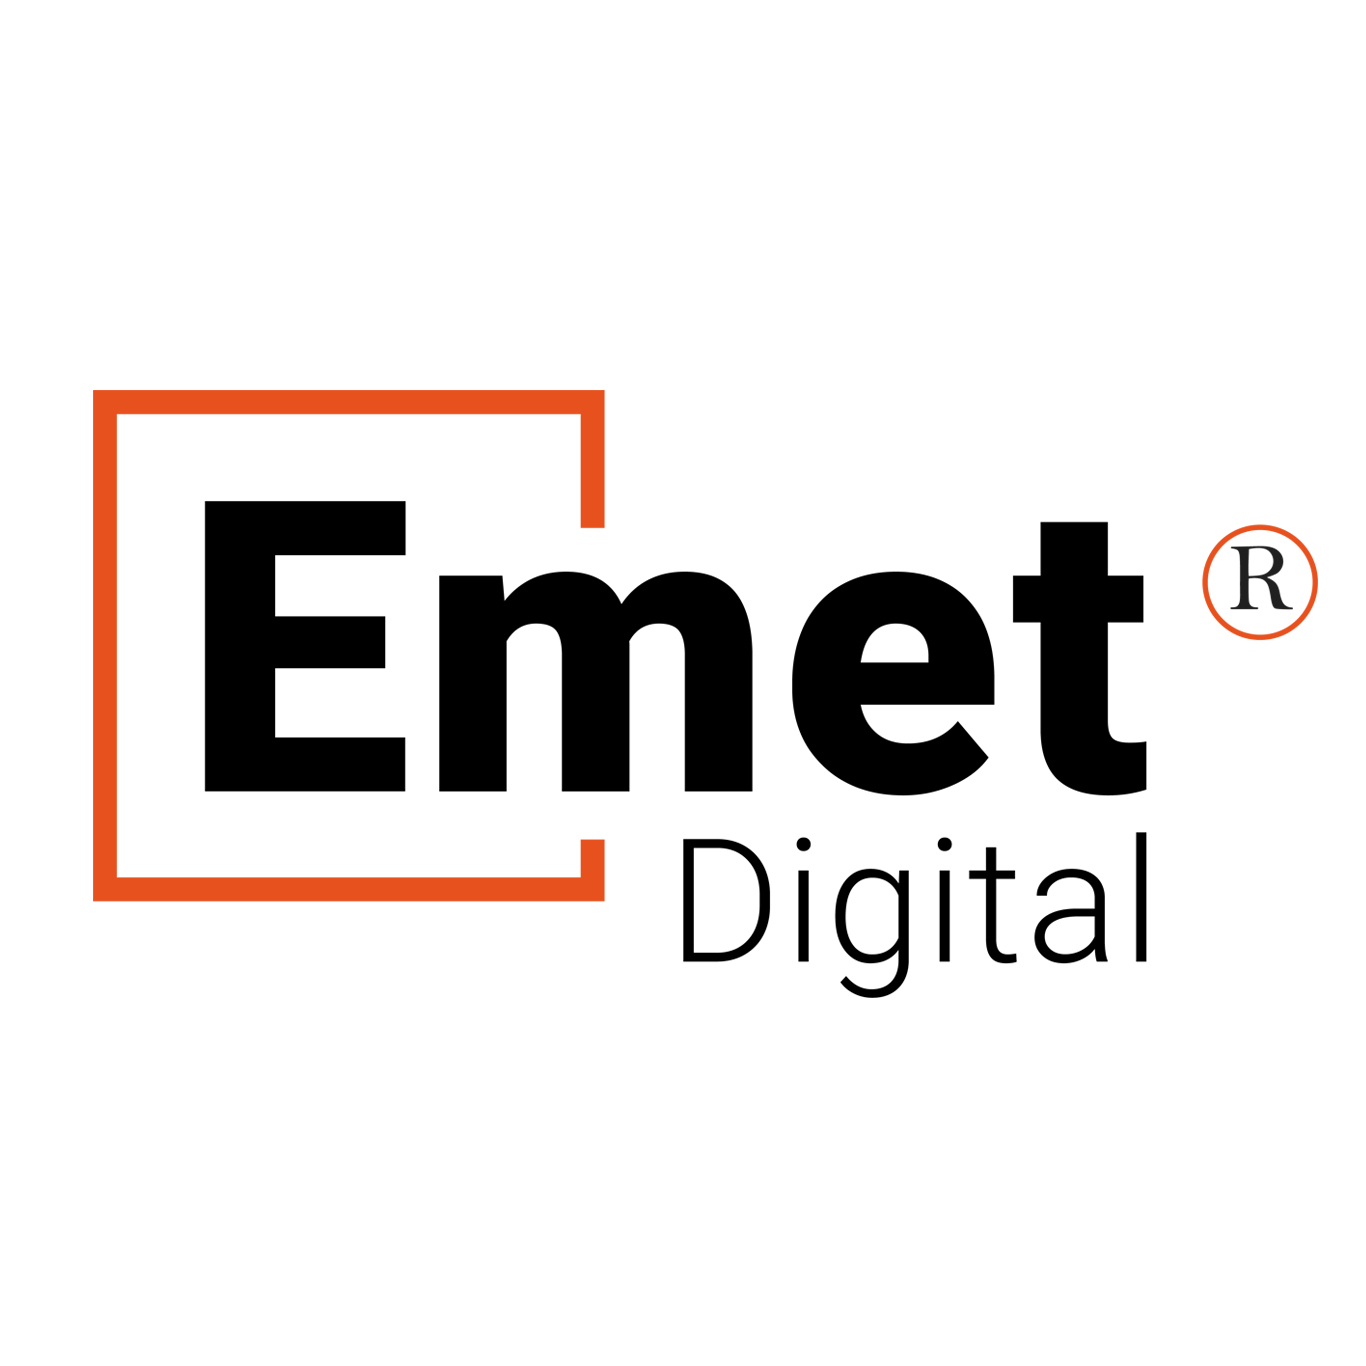 Emet Digital, a leading digital marketing agency in Long Beach, secures the coveted title of Best Official Yelp Premier Partner